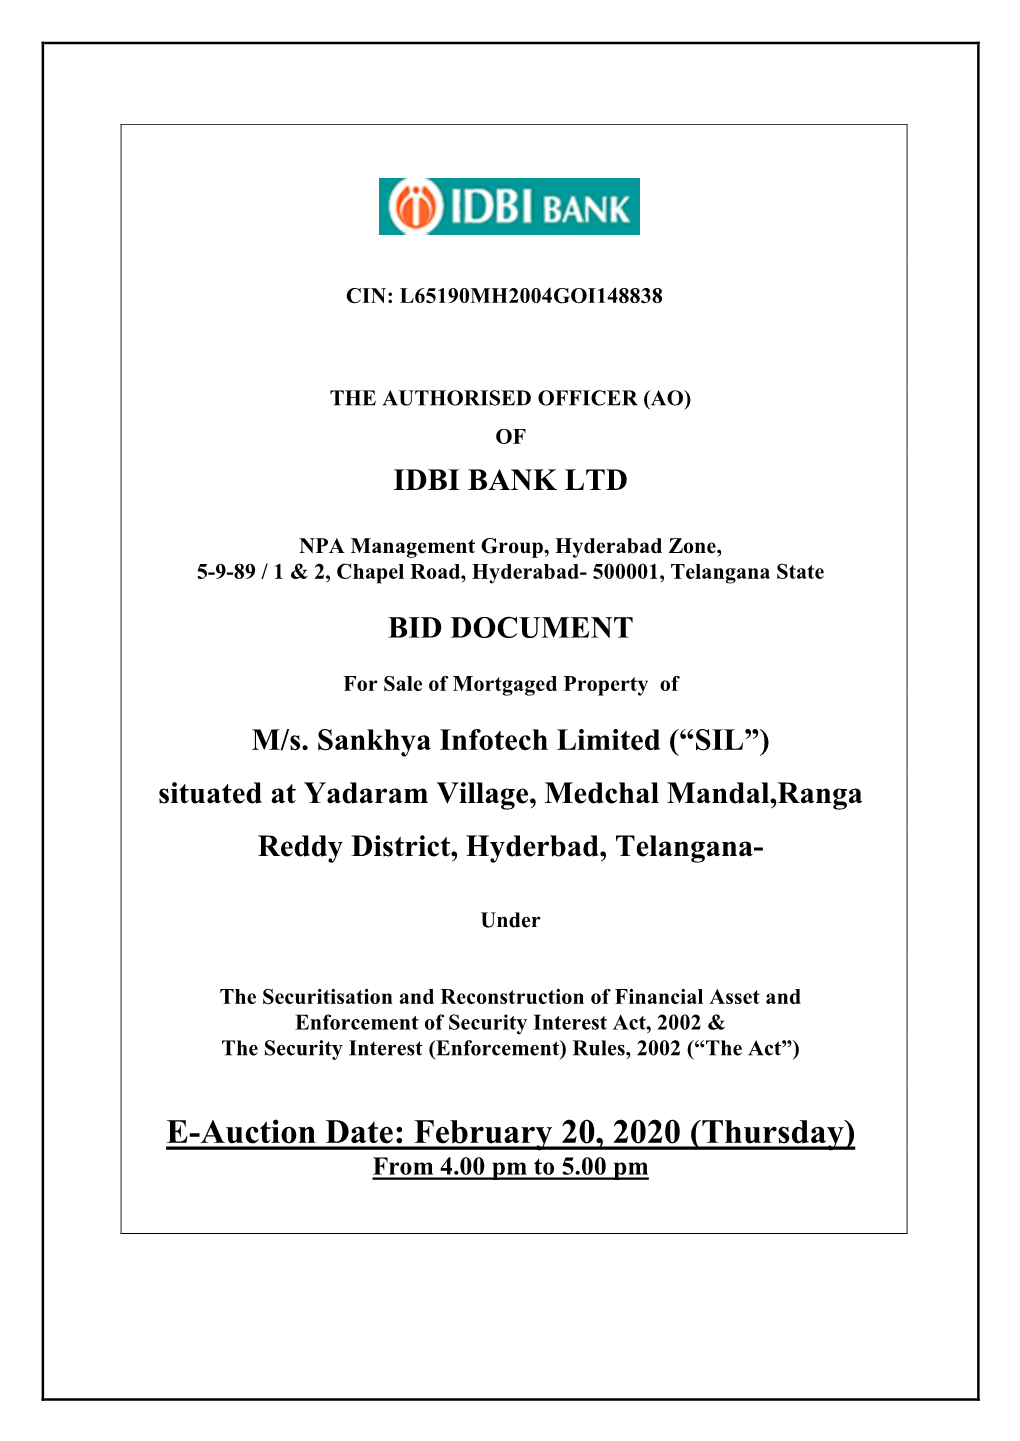 E-Auction Date: February 20, 2020 (Thursday) from 4.00 Pm to 5.00 Pm